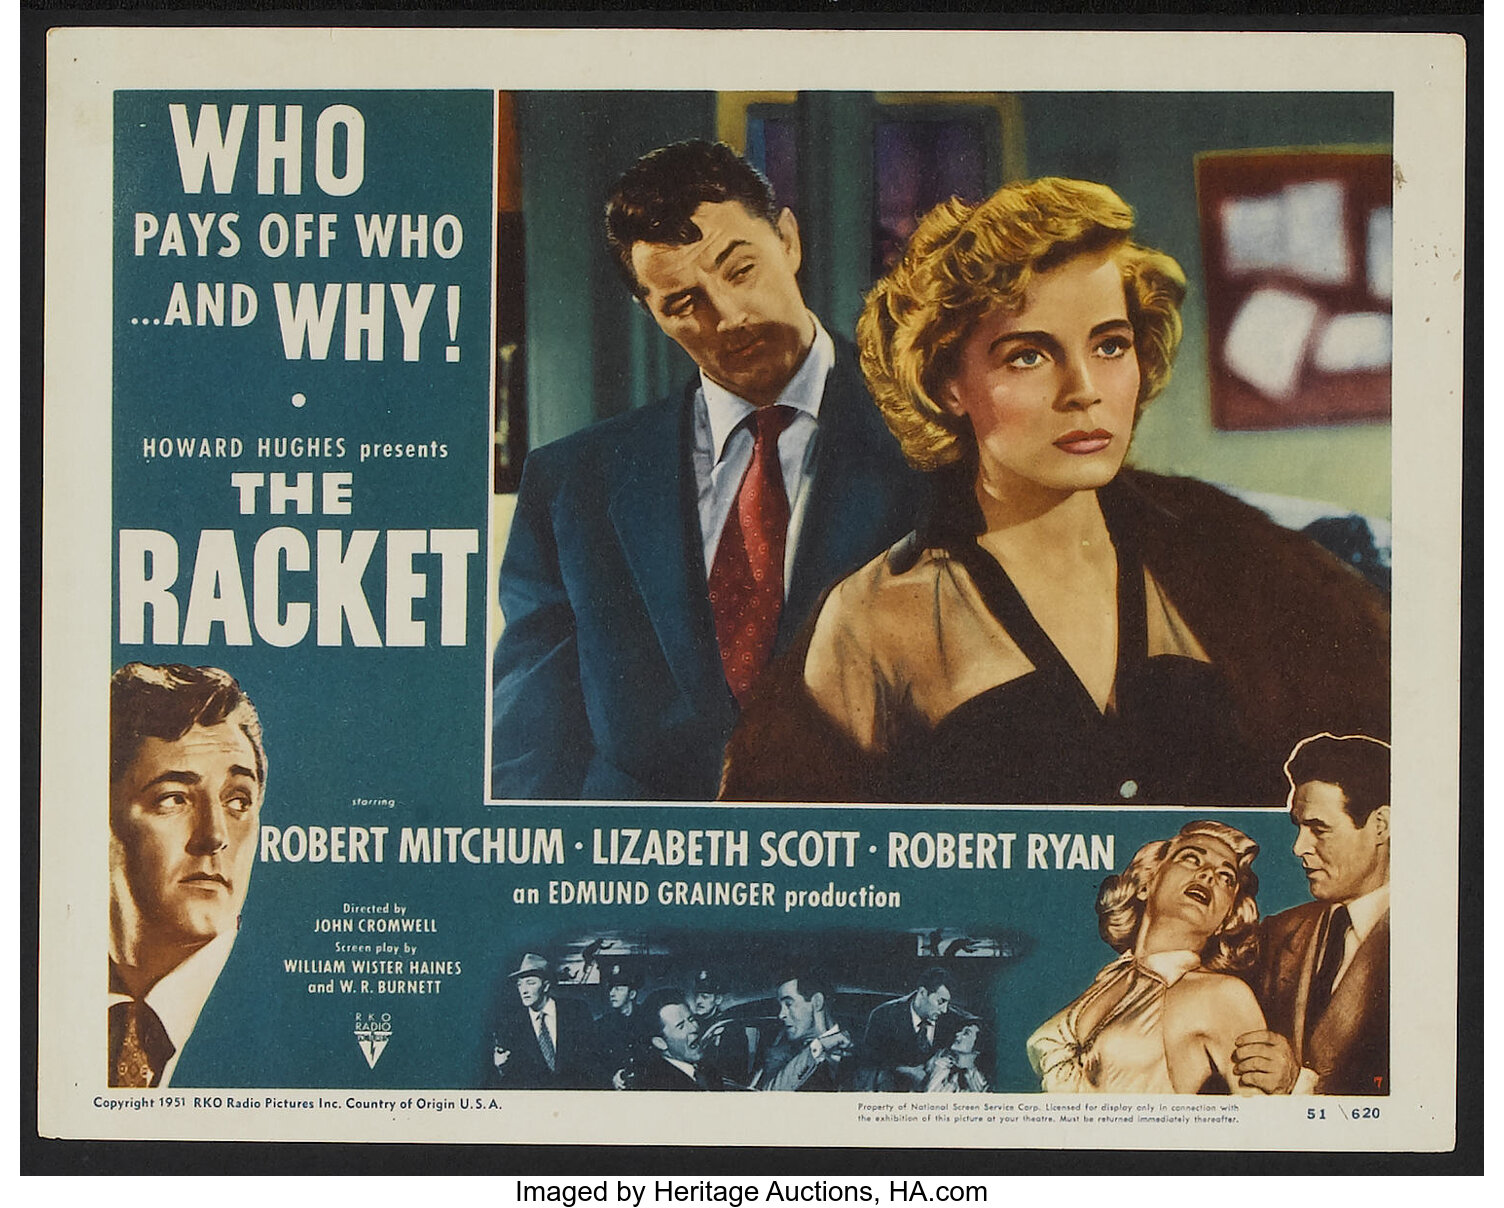 The Racket Rko 1951 Lobby Card Set Of 8 11 X 14 Film Lot 51315 Heritage Auctions 5991